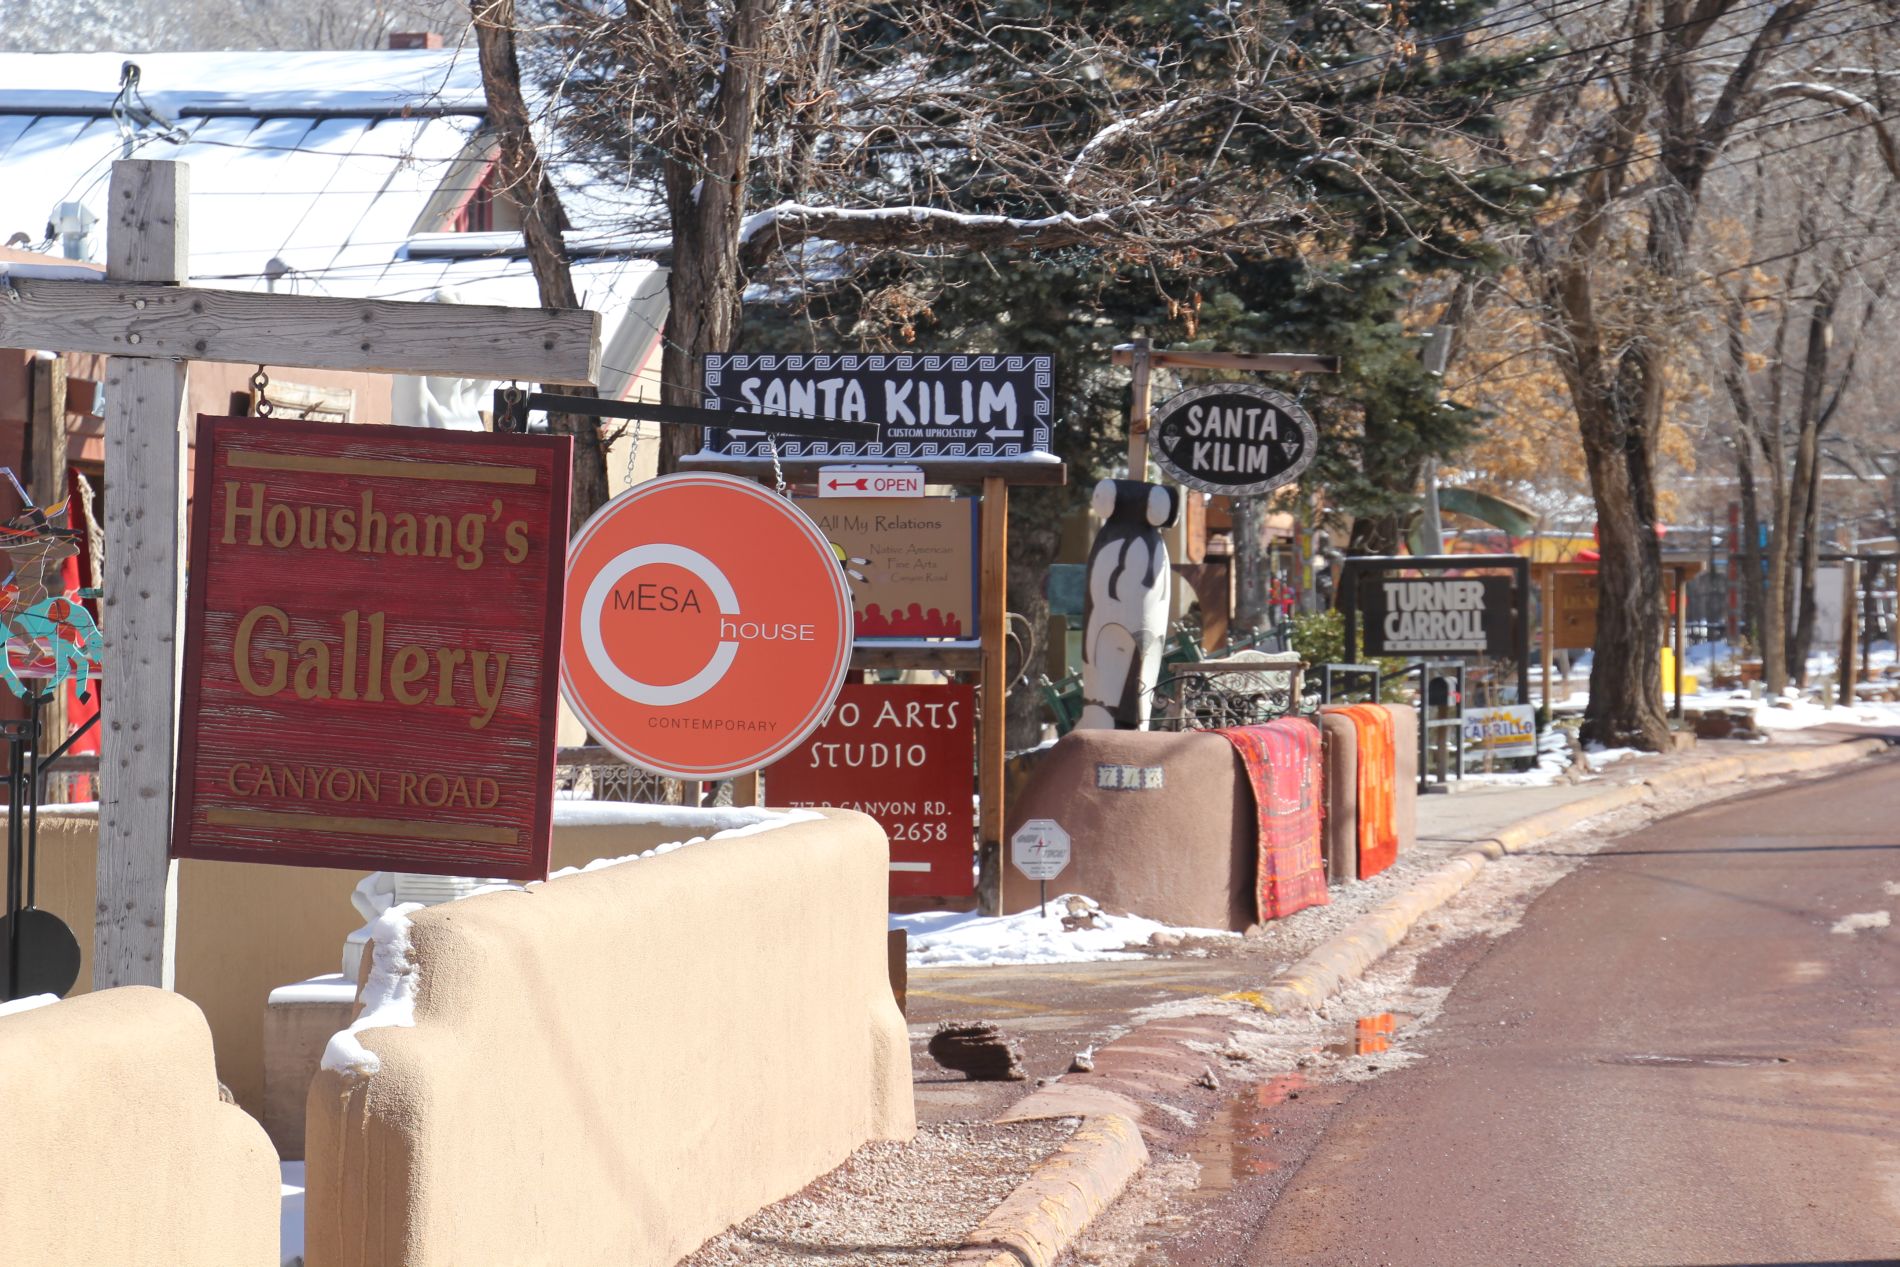 Galleries on Canyon Road in Santa Fe, New Mexico